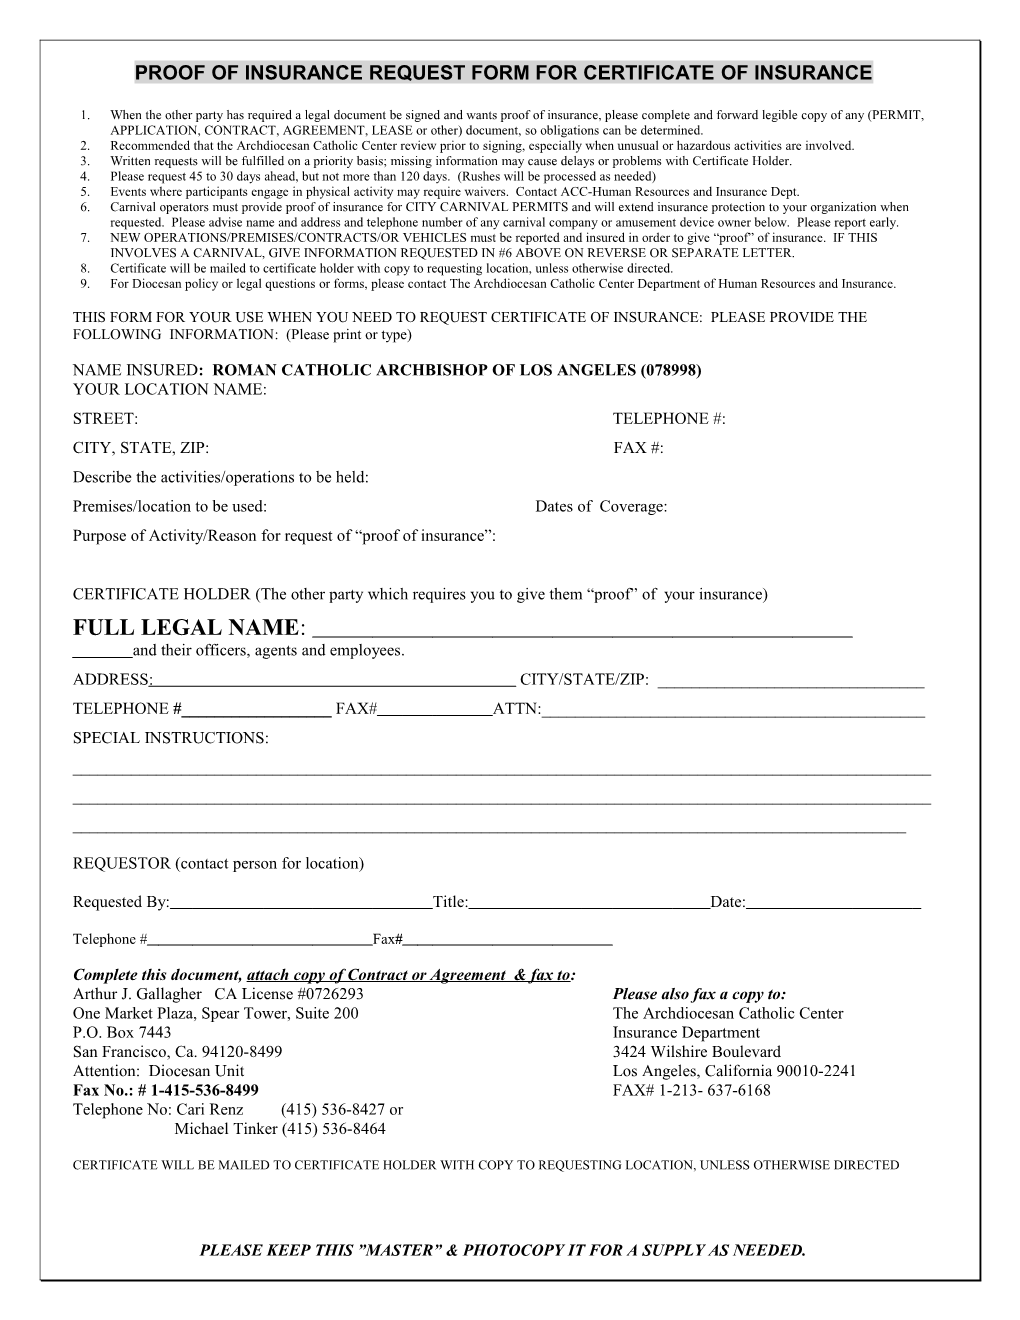 “Proof Of Insurance” Request Form For ”Certificate Of Insurance”